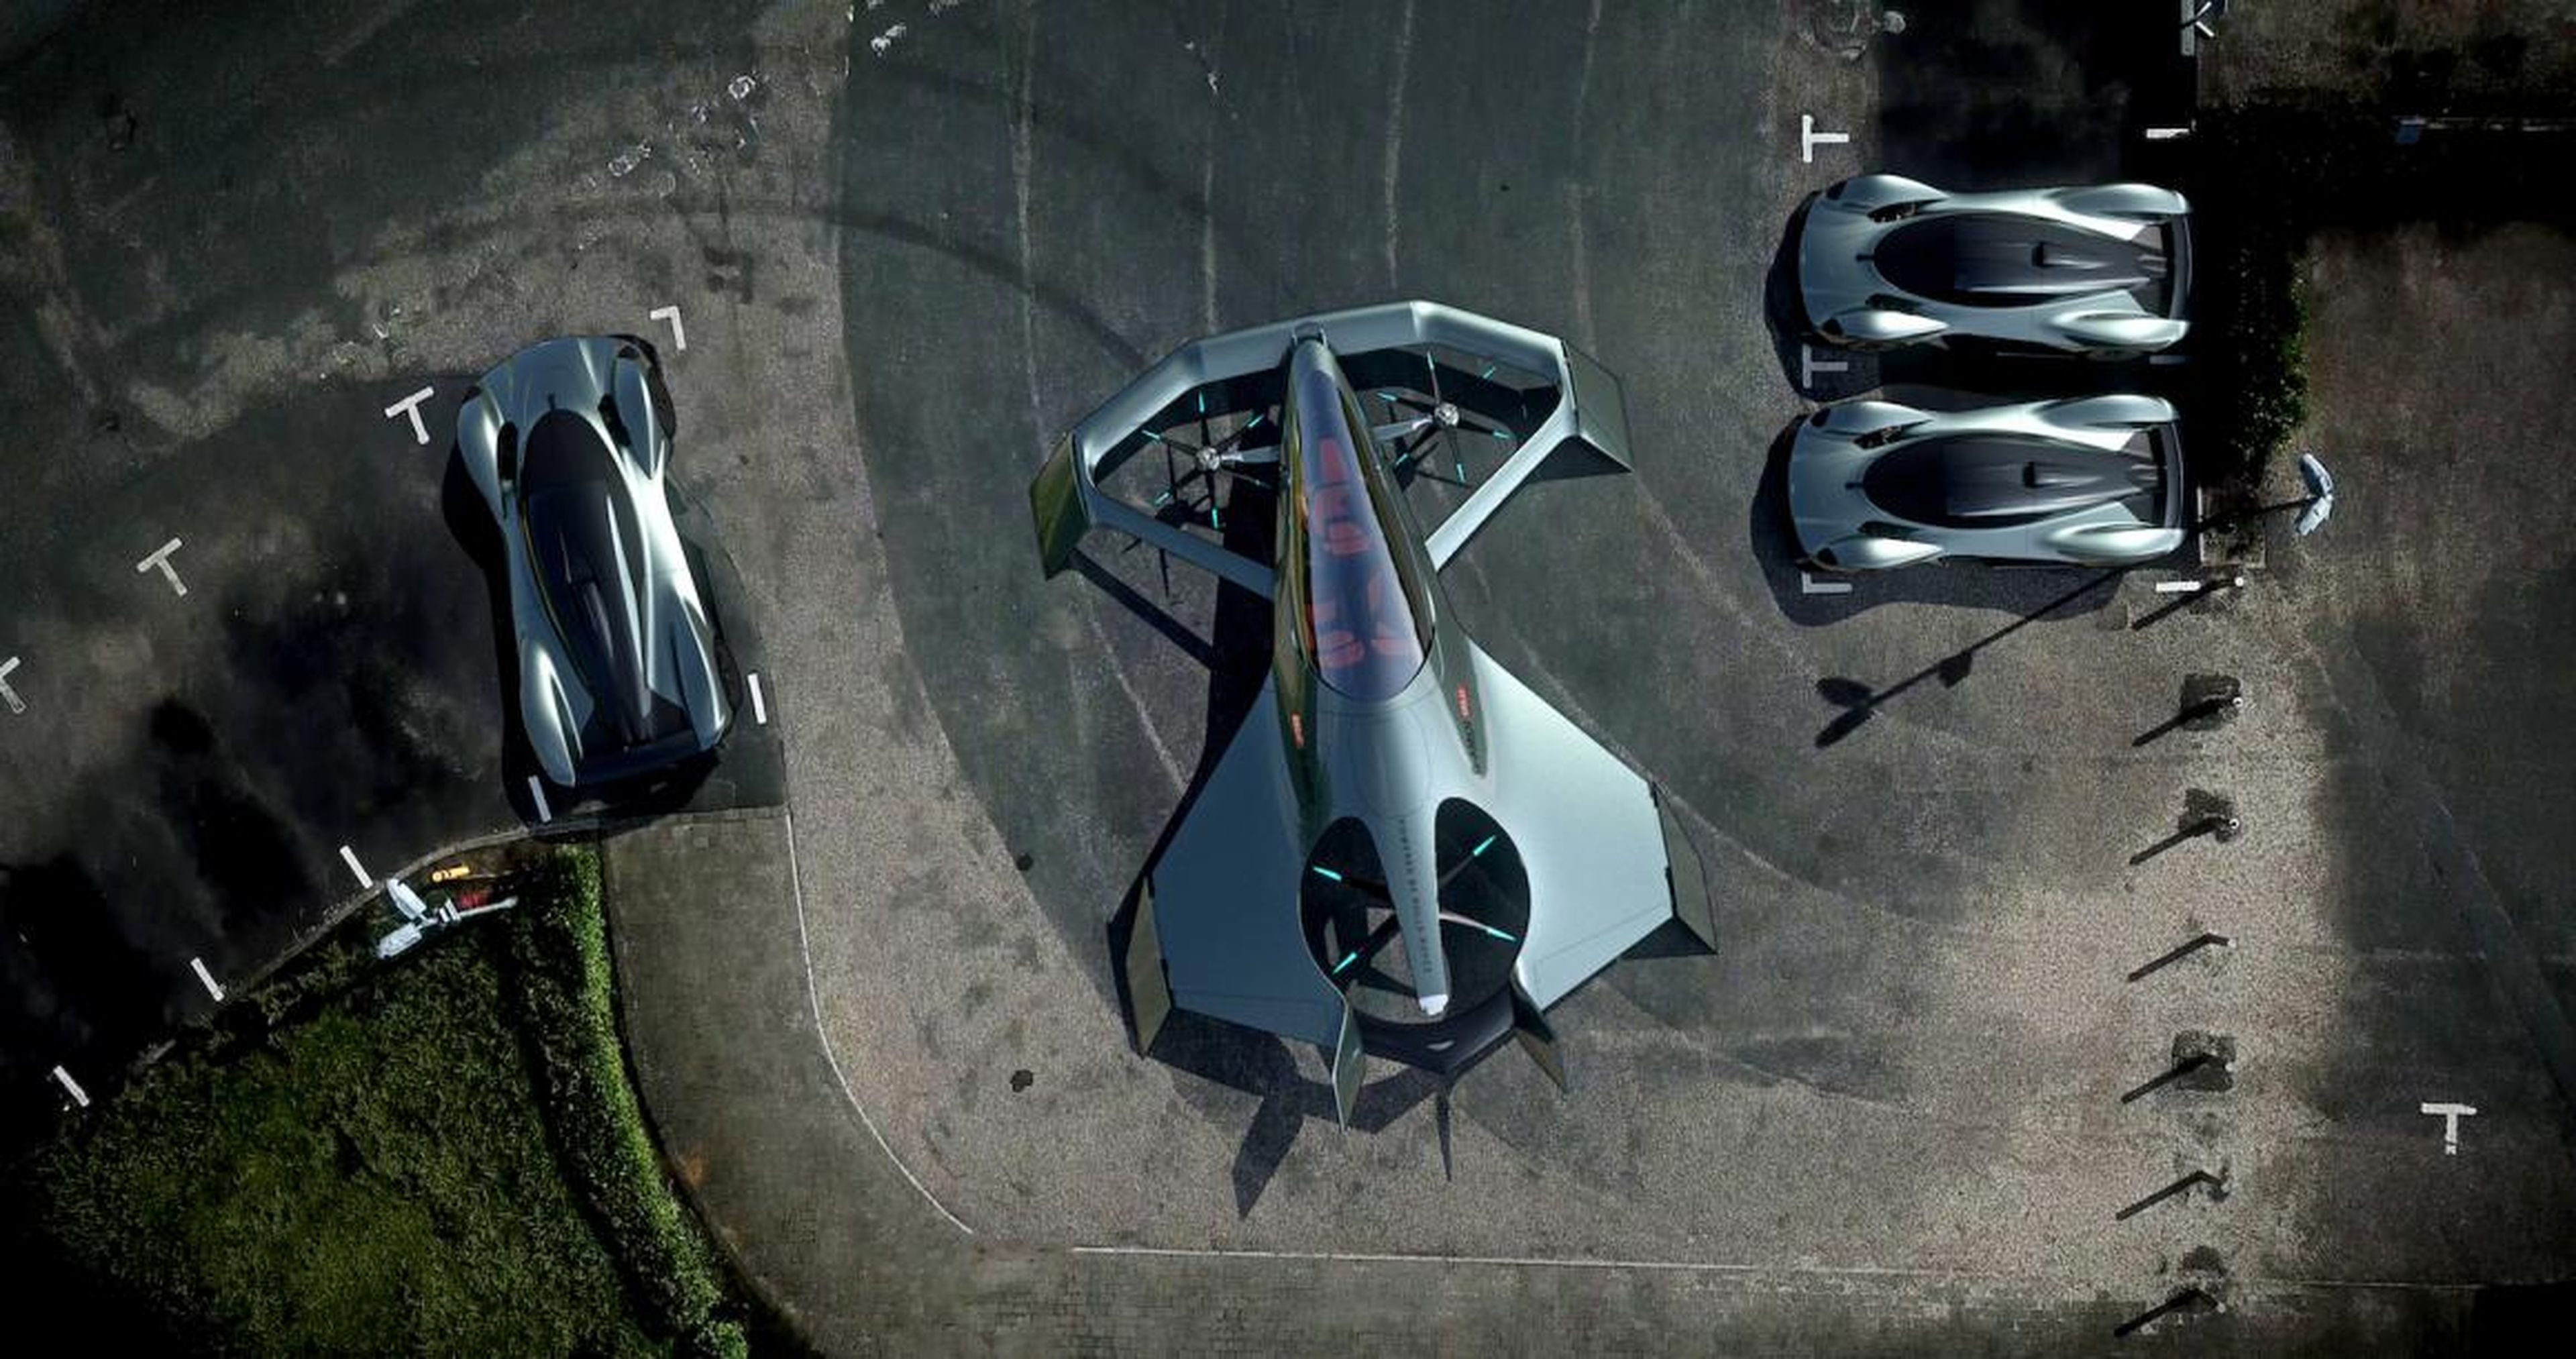 Aston Martin has unveiled a flying car concept — and it hinted that we might see James Bond flying one soon